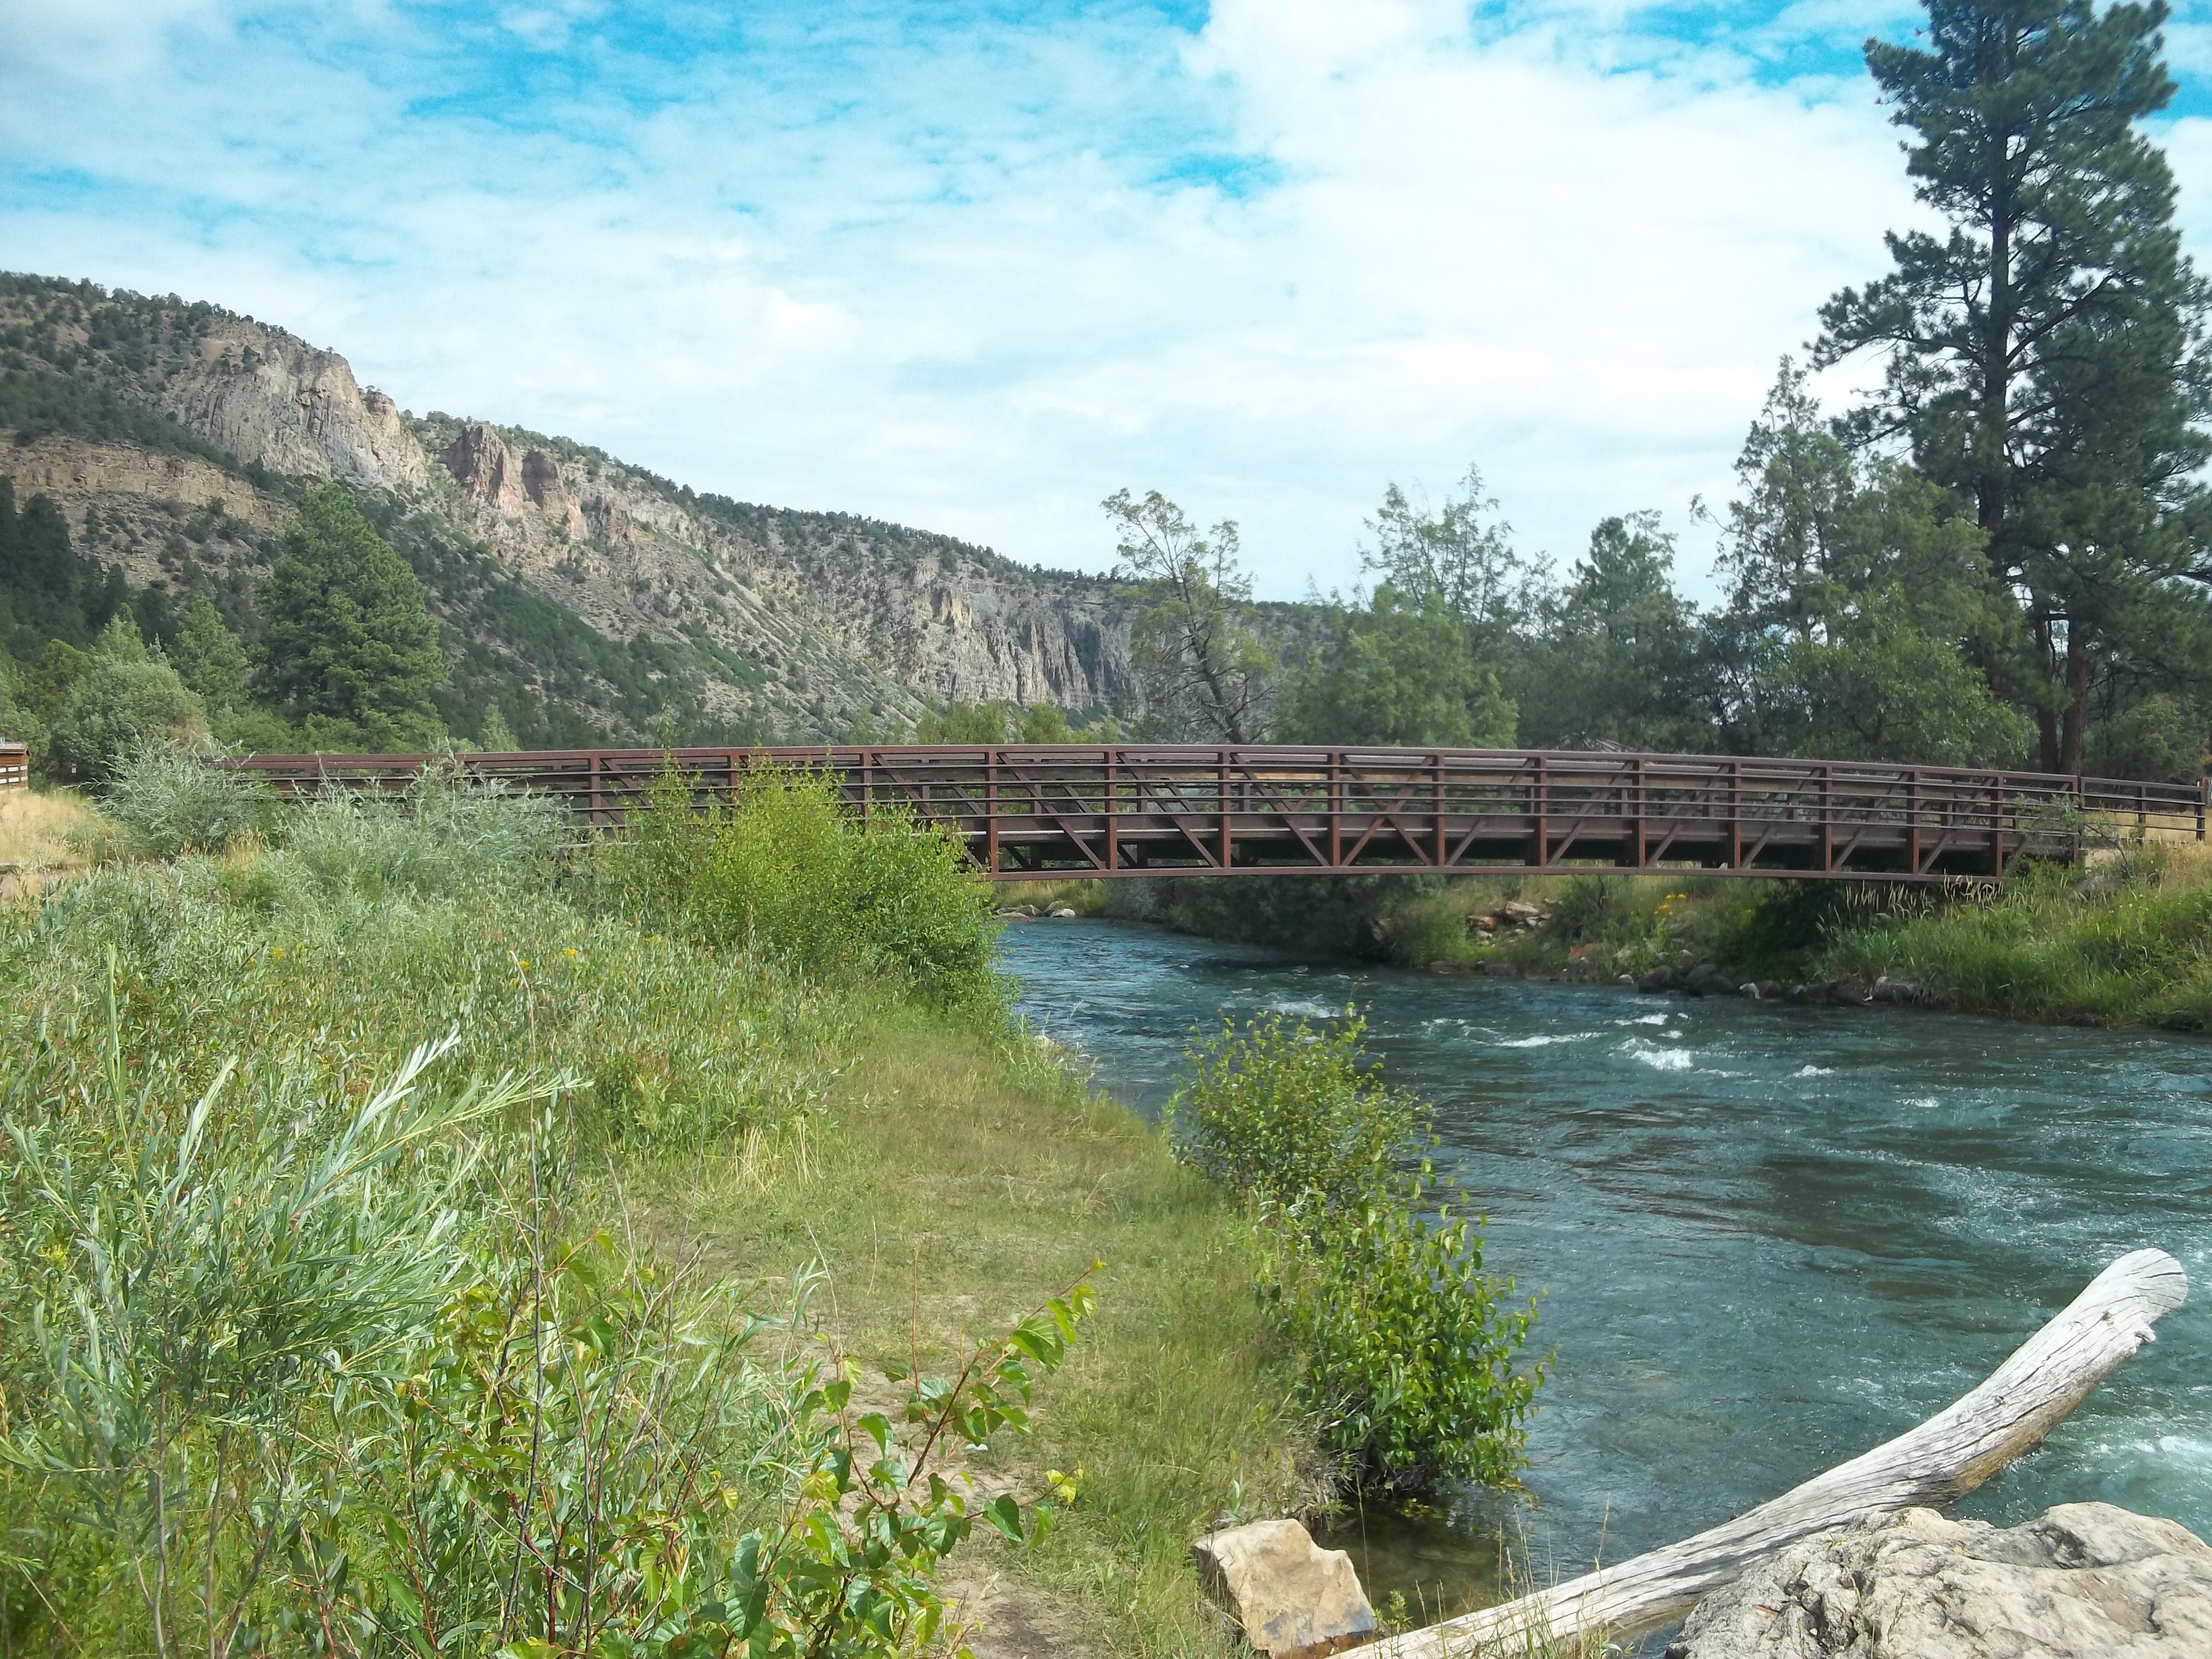 The Uncompahgre tailwaters near camp (a small footbridge allows anglers to fish both sides of the stream without attempting a difficult crossing.)